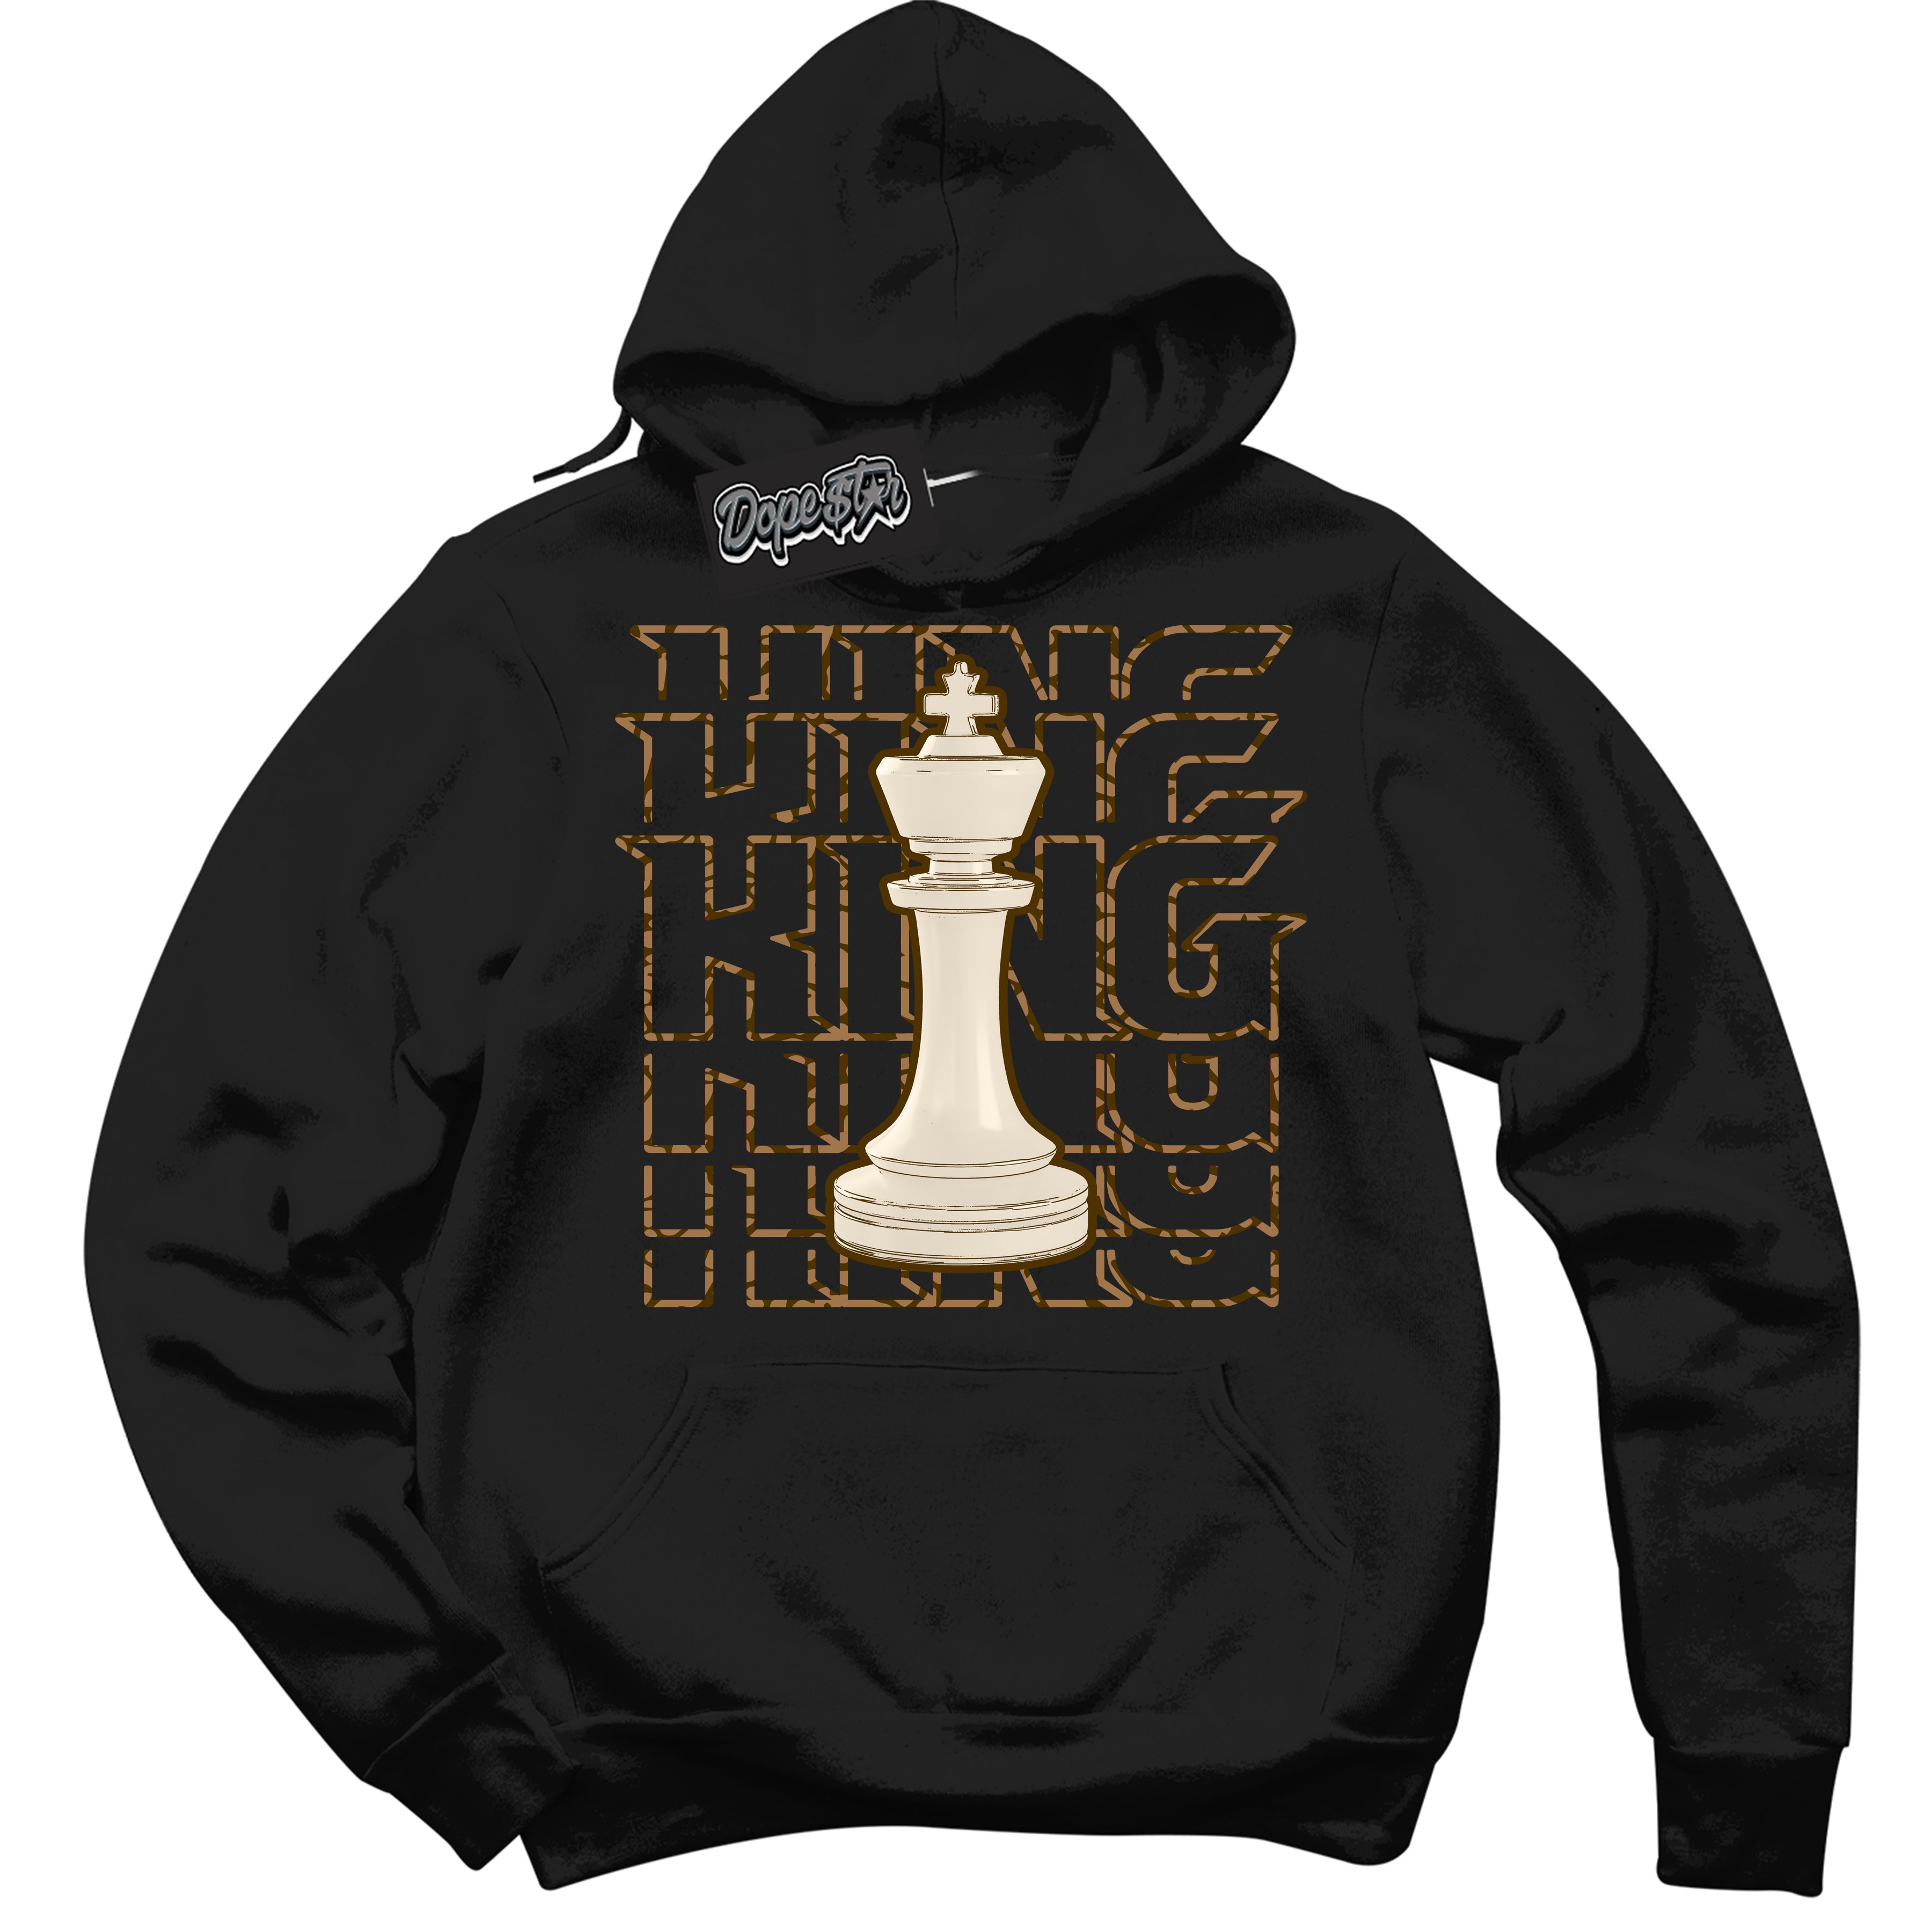 Cool Black Graphic DopeStar Hoodie with “ King Chess “ print, that perfectly matches Palomino 3s sneakers